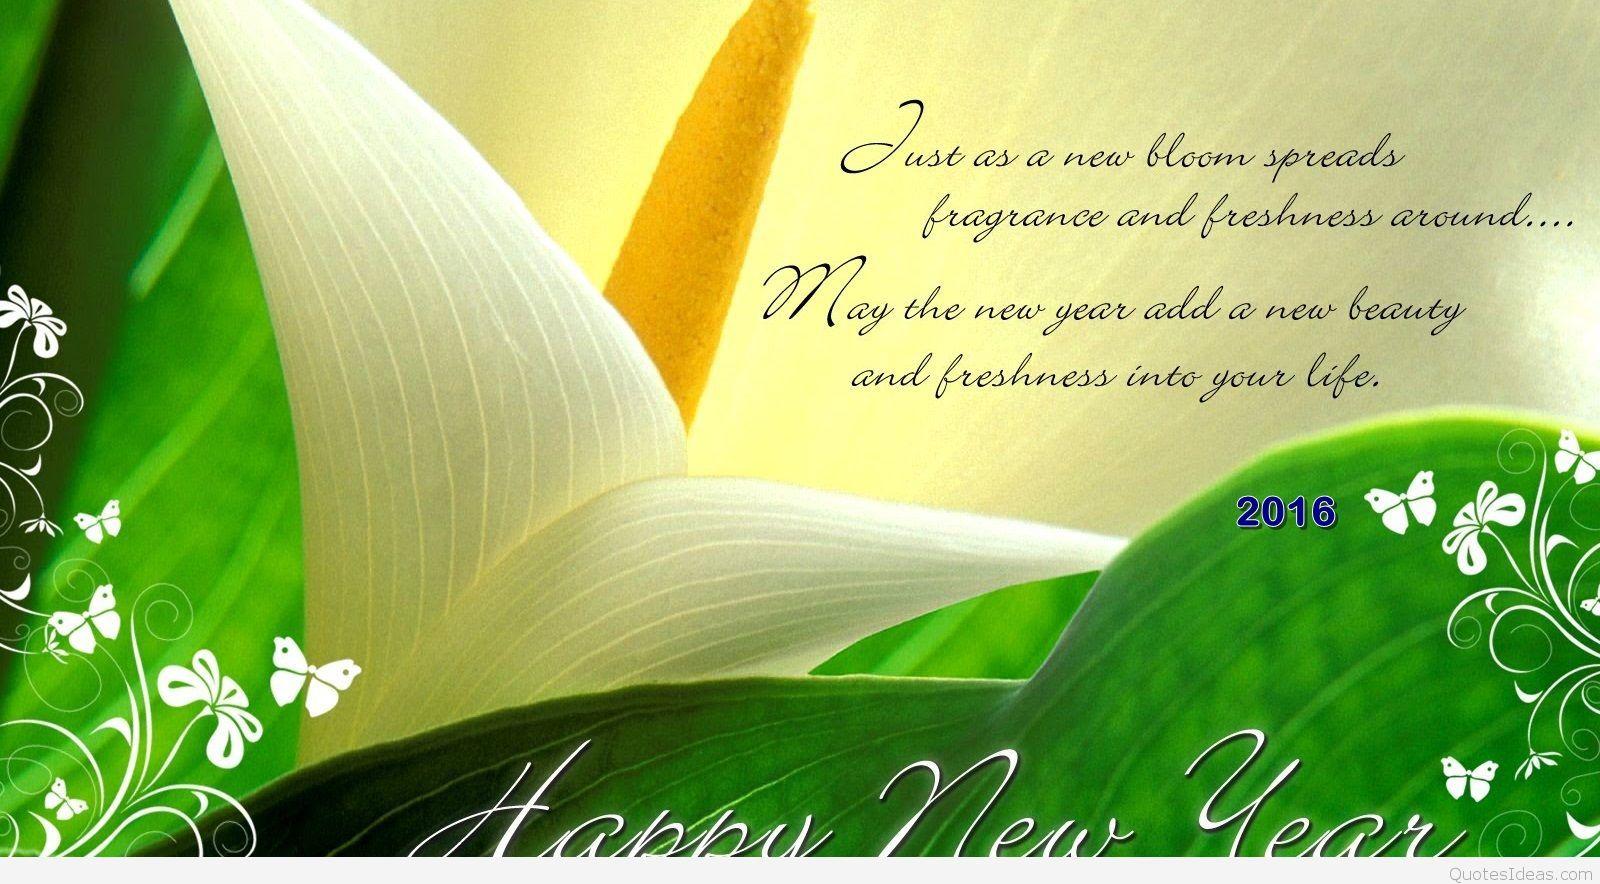 Happy new year quotes image to share on FB